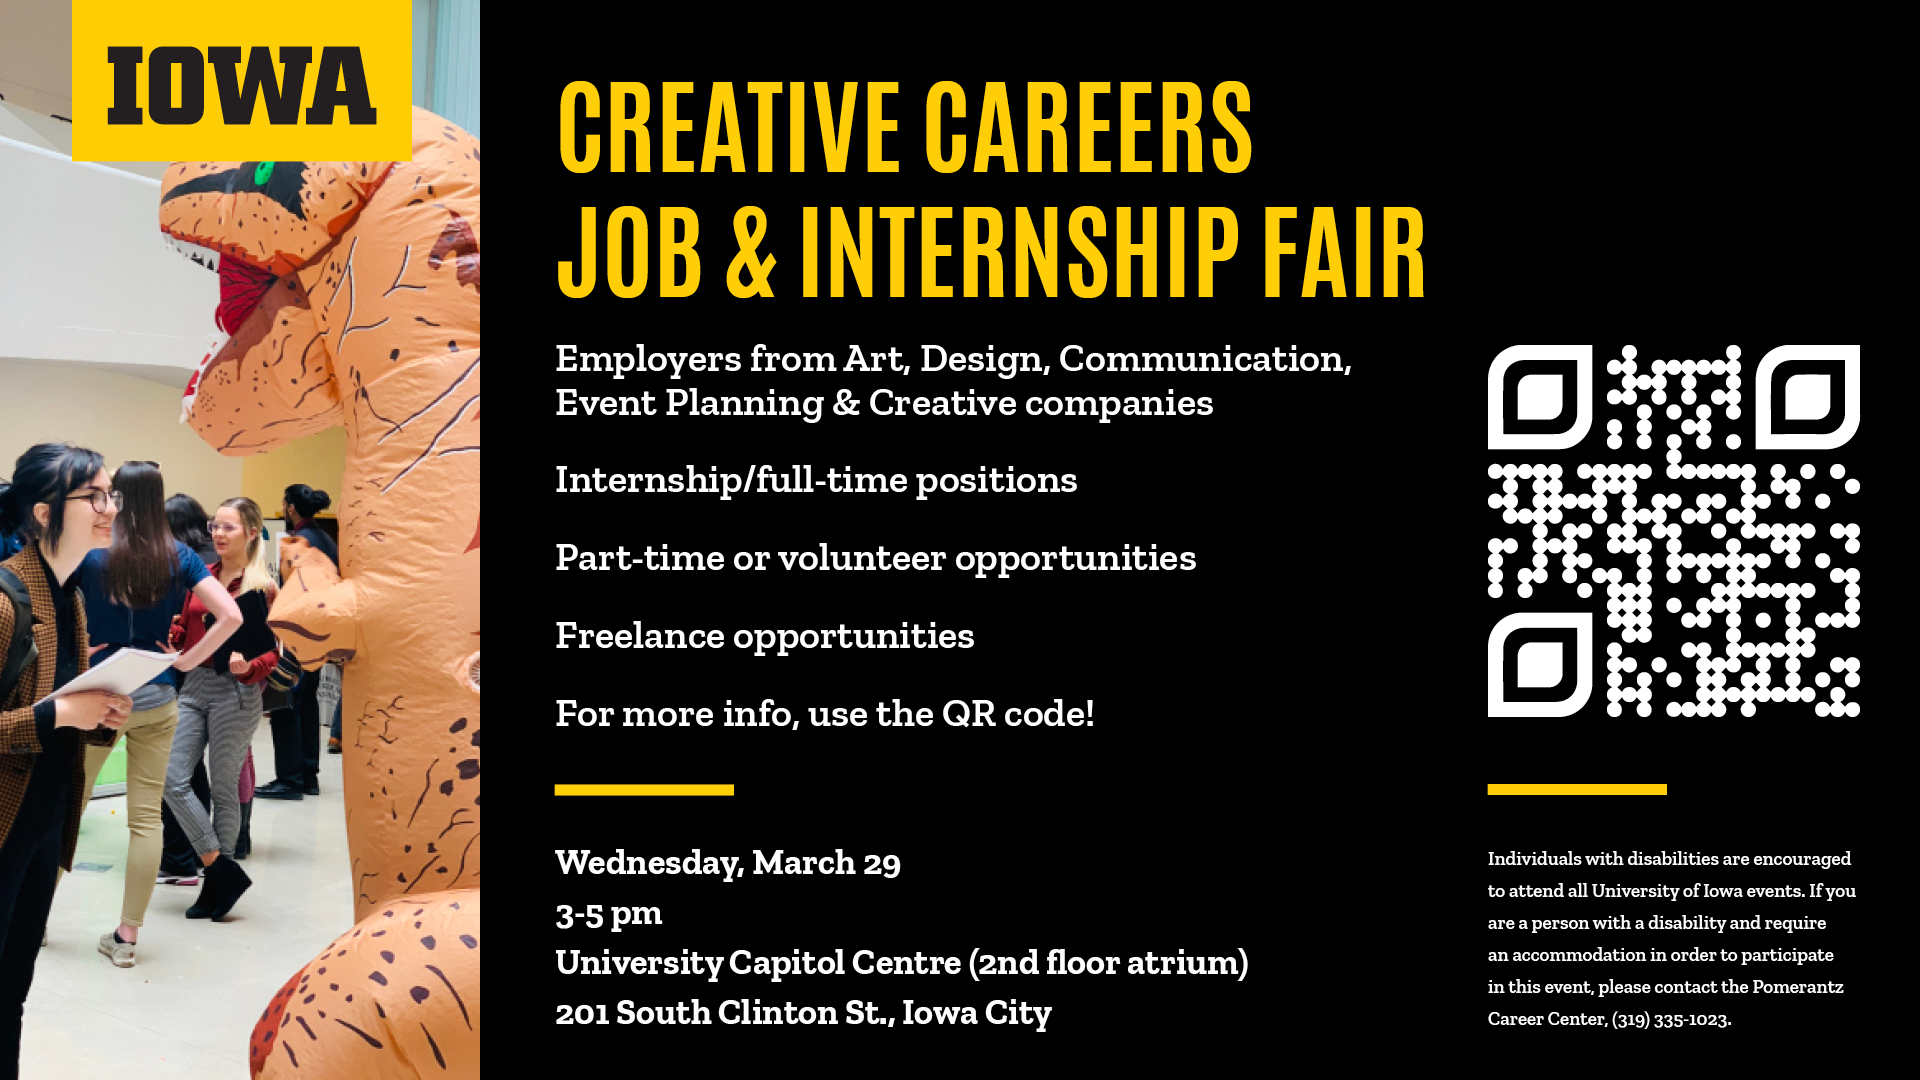 Flier for Creative Careers Job and Internship; black background and yellow font